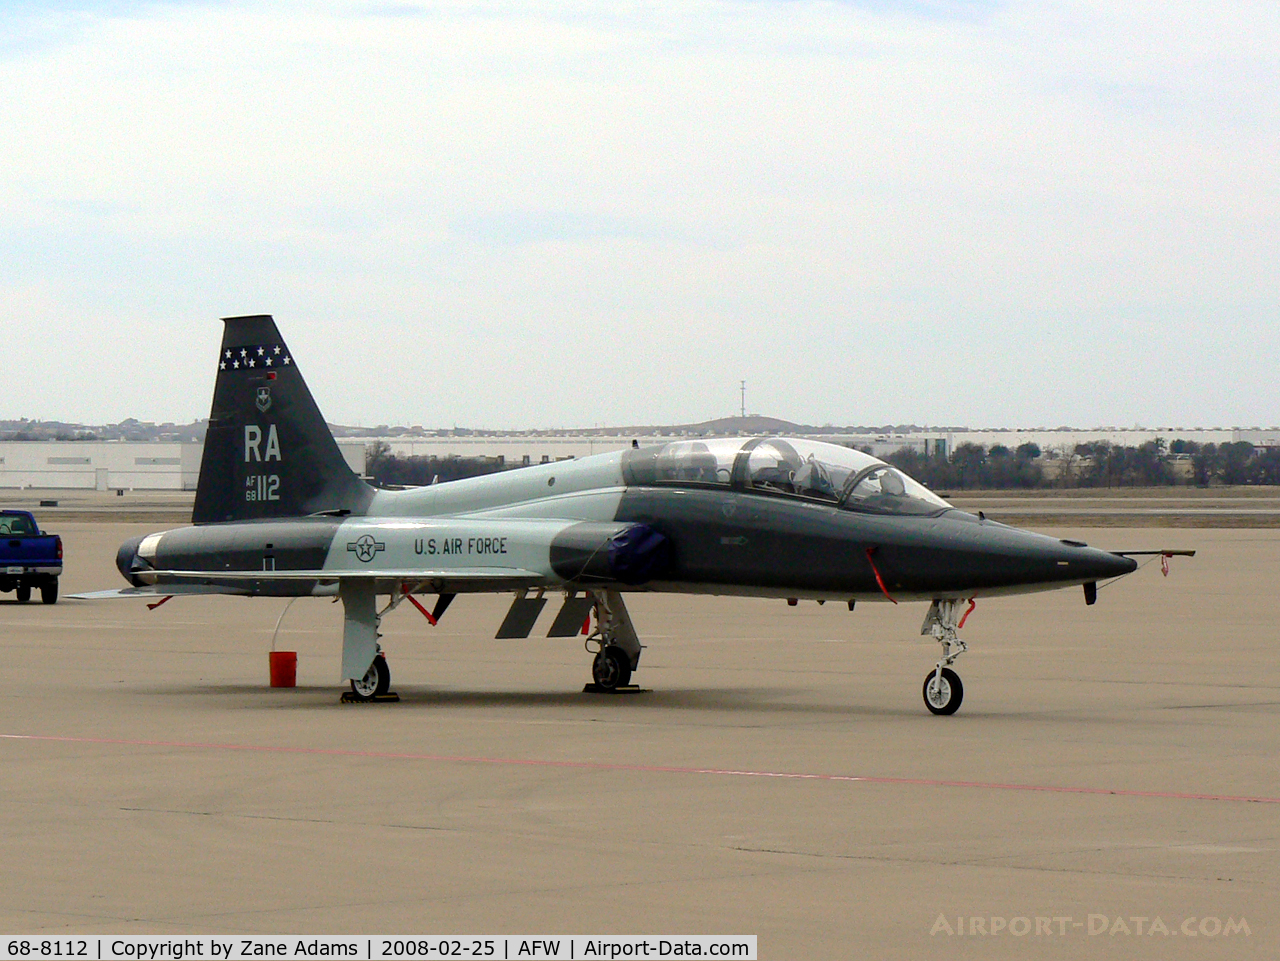 68-8112, 1968 Northrop T-38C Talon C/N T.6117, T-38C (converted from T-38A) At Alliance Ft. Worth